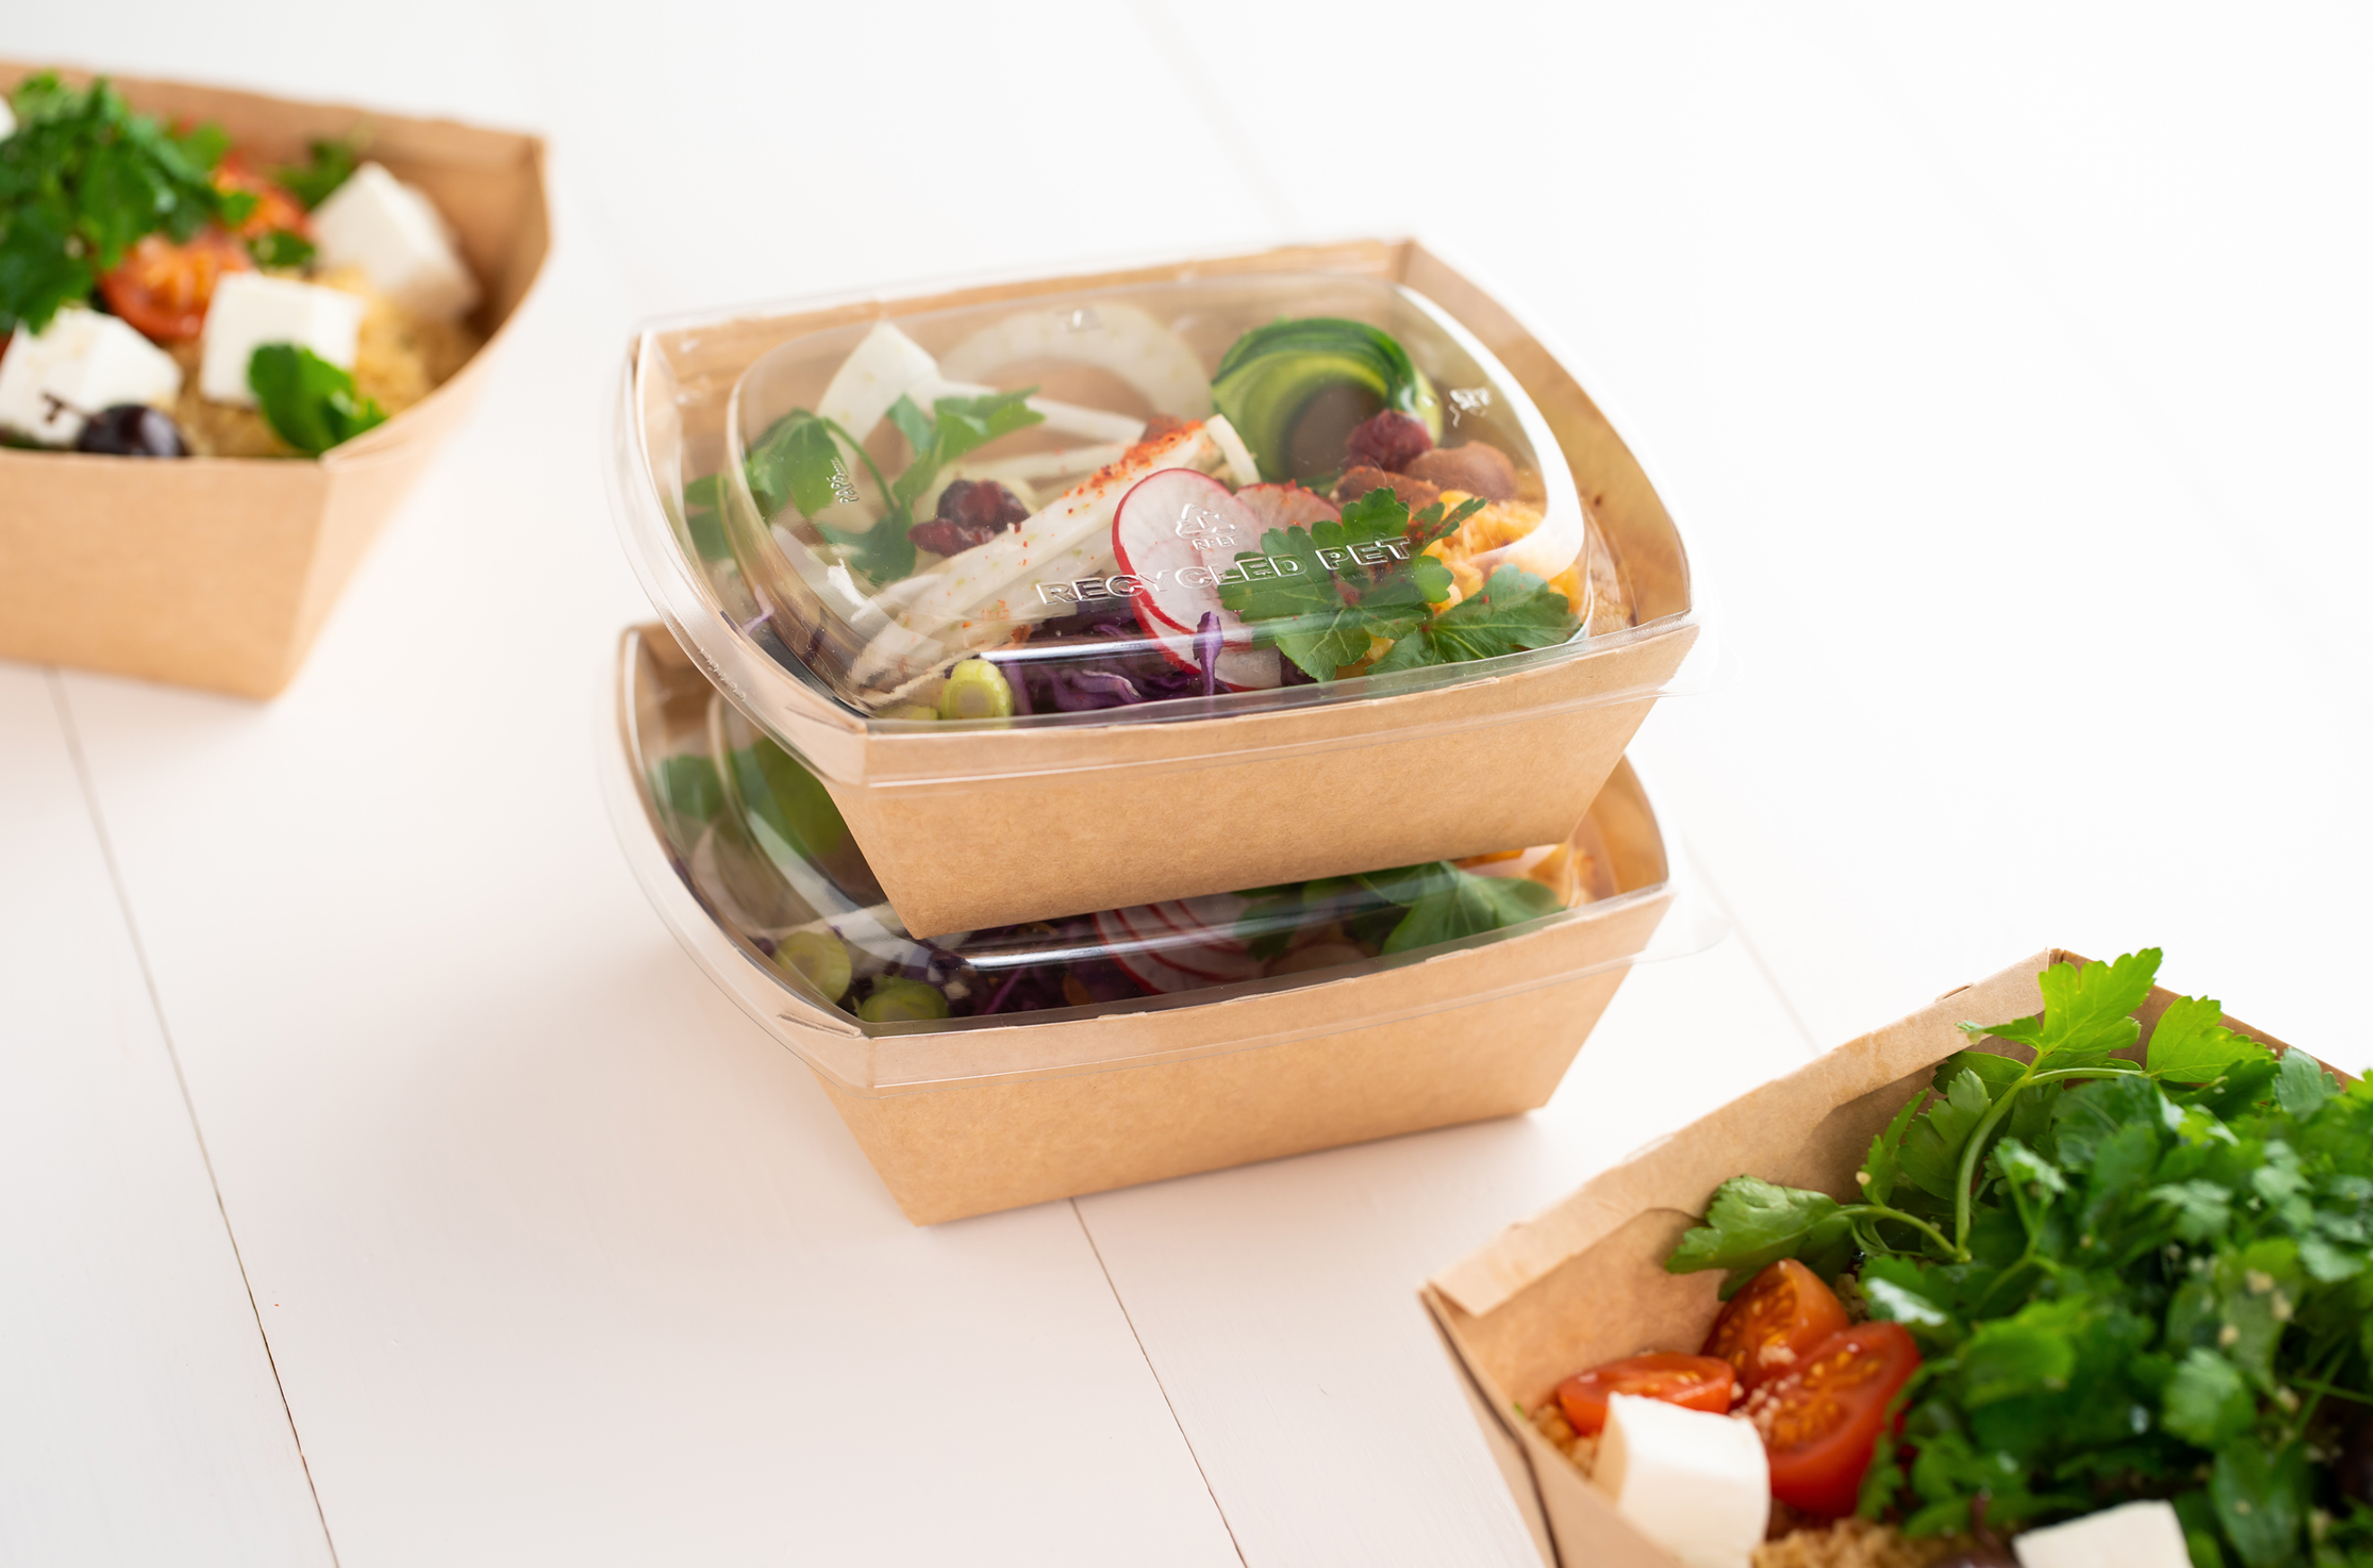 Sabert Snap2Go innovative fully recyclable food to go packaging solution